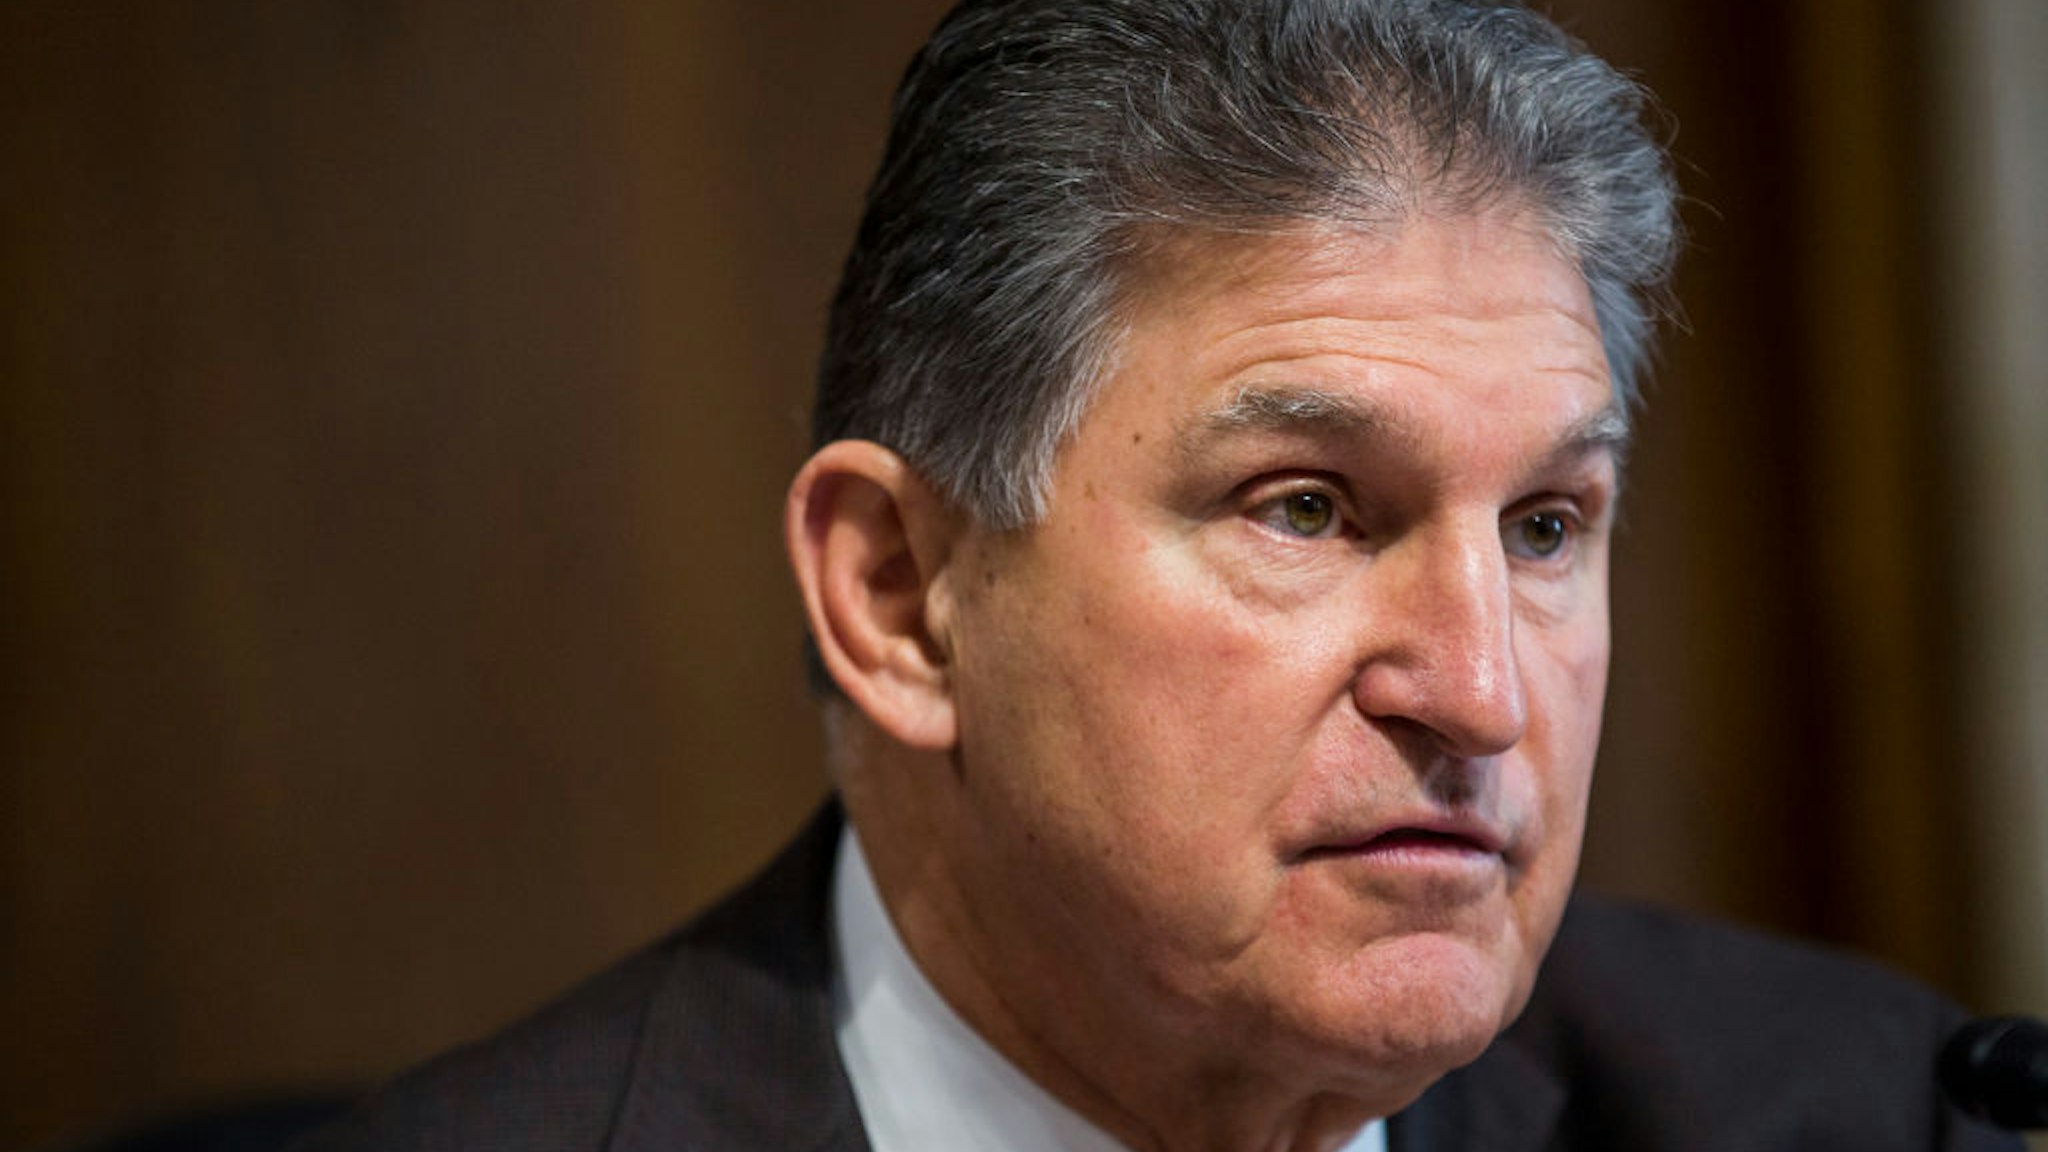 Senate Energy and Natural Resources Ranking Member Senator Joe Manchin (D-WV) speaks during a Senate Energy and Natural Resources Committee confirmation hearing on March 28, 2019 in Washington, DC.